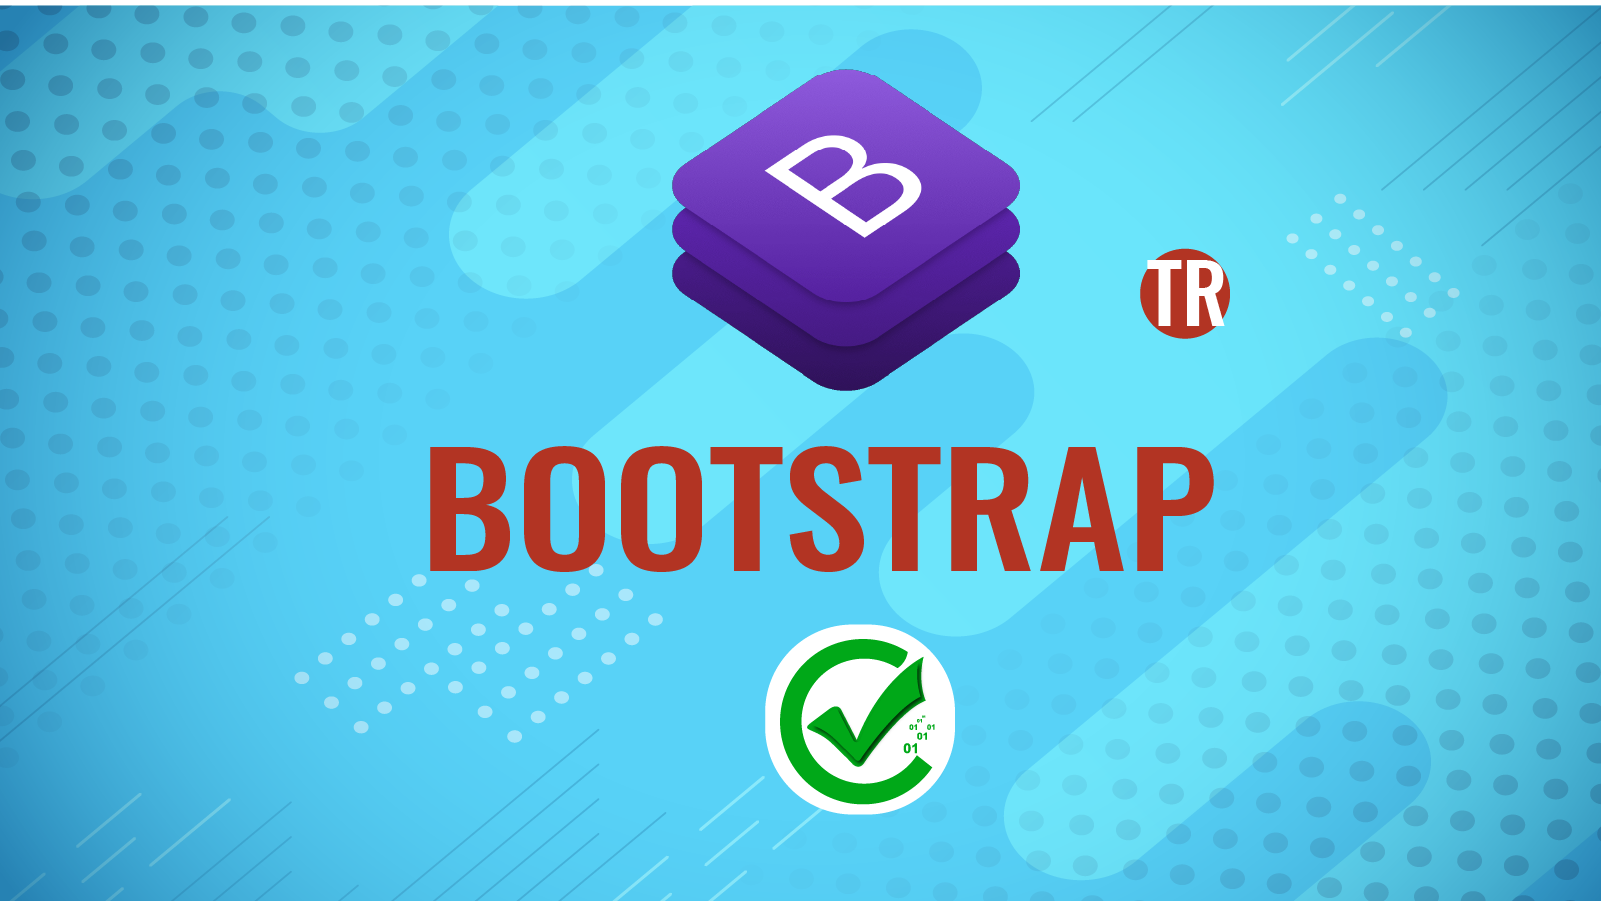 BOOTSTRAP 130 131 158 169 218